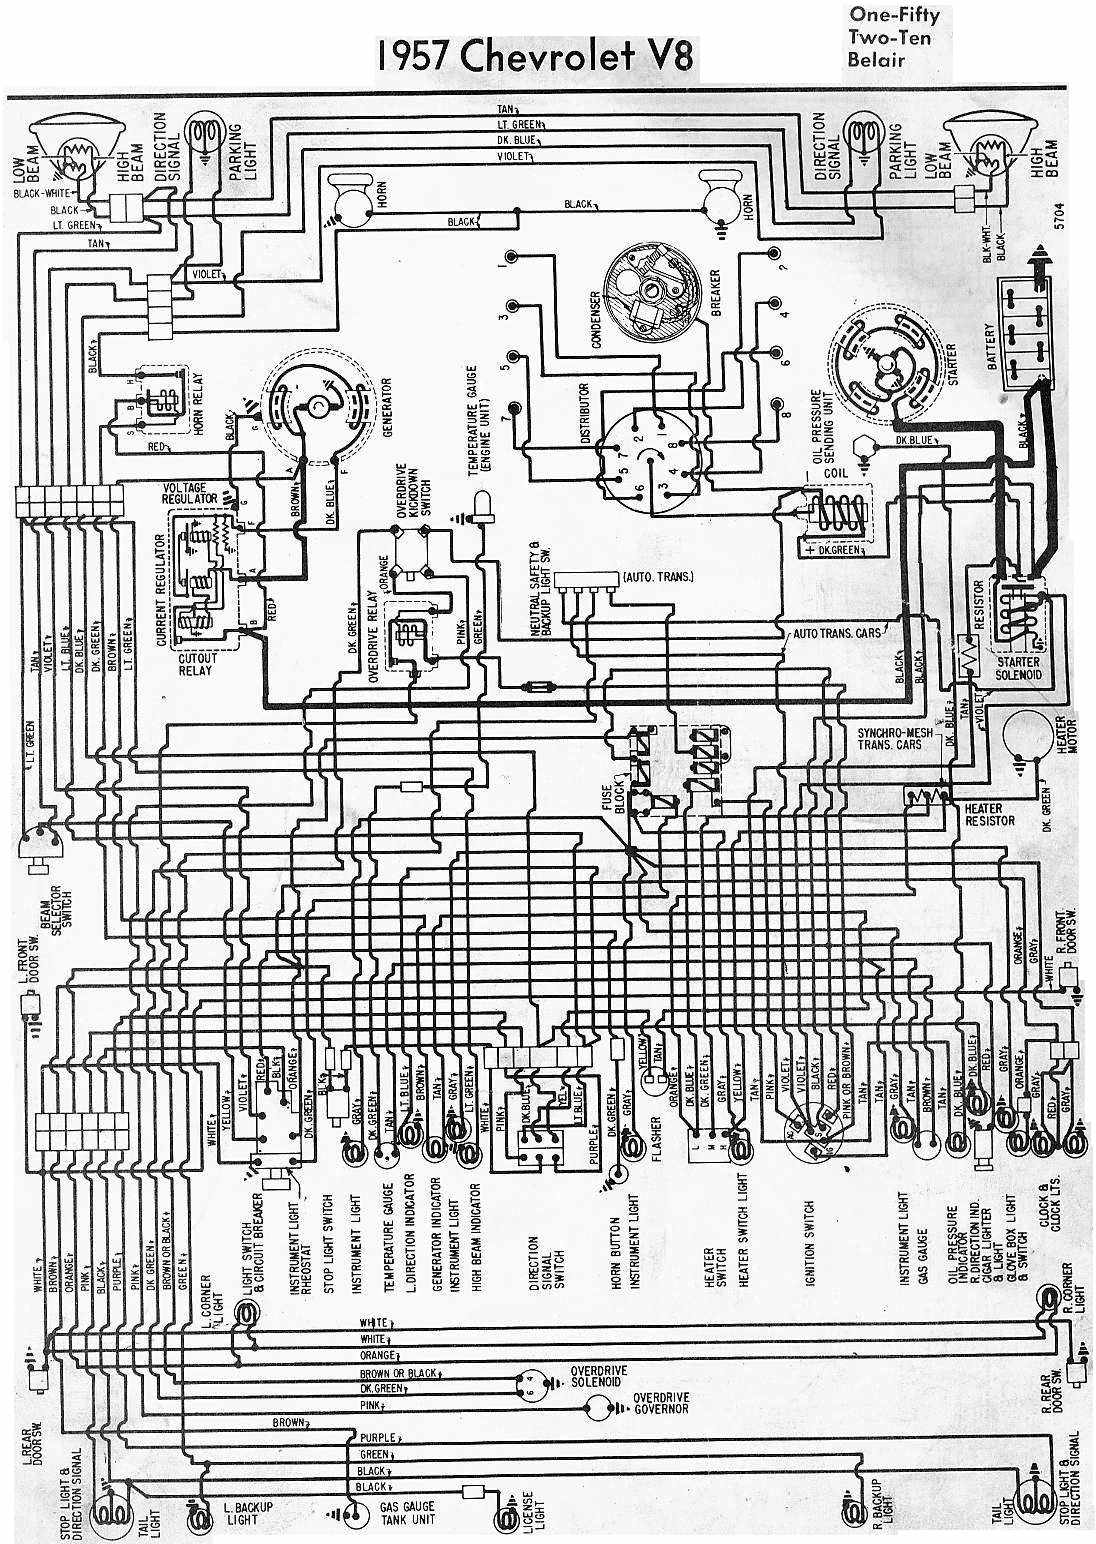 Complete Wiring Schematic Of 1957 Chevrolet V8 | All about Wiring Diagrams